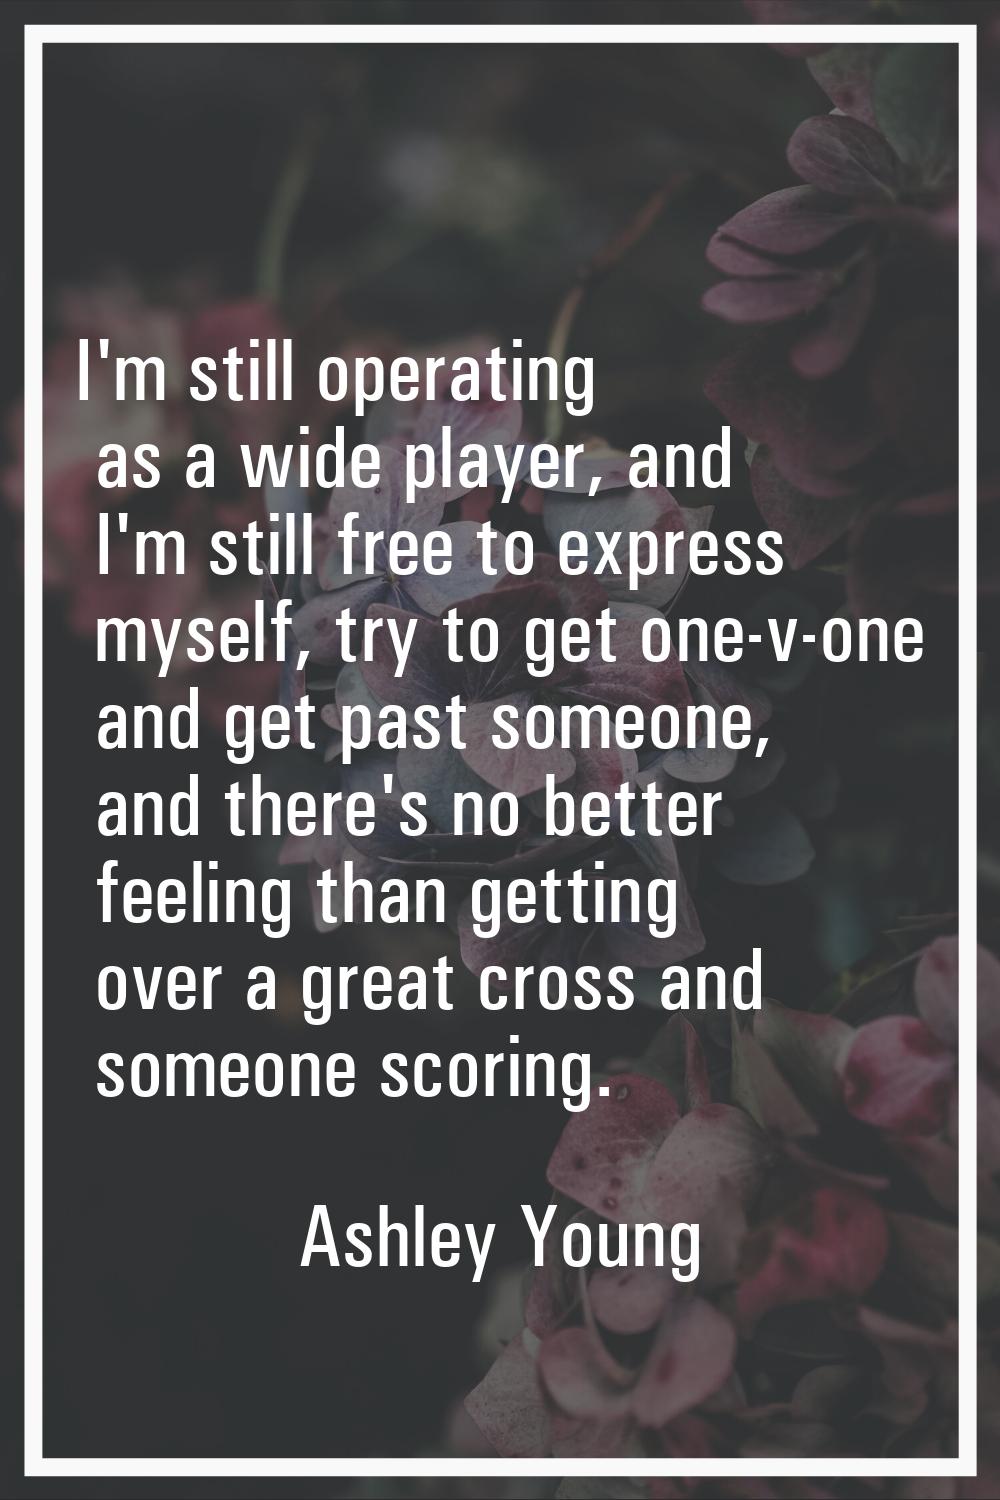 I'm still operating as a wide player, and I'm still free to express myself, try to get one-v-one an